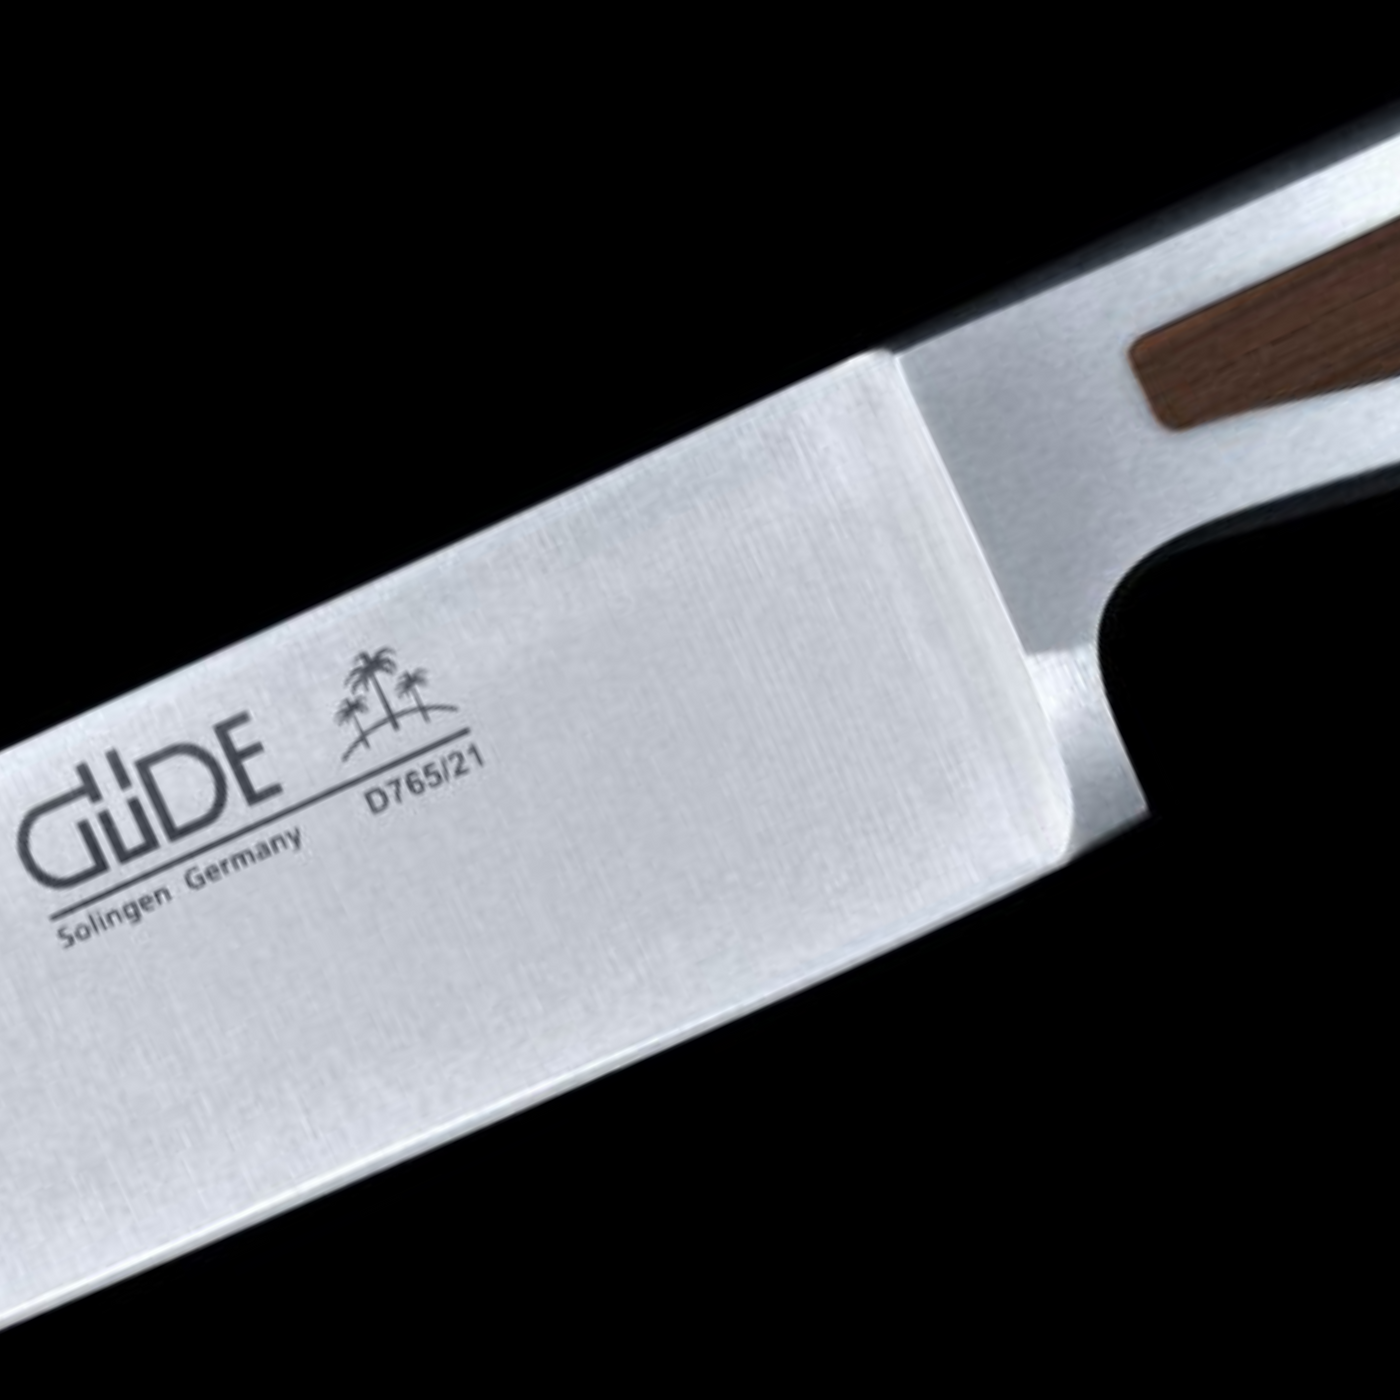 Gude Delta Slicing Knife With African Black Wood Handle, 8-in - Kitchen Universe